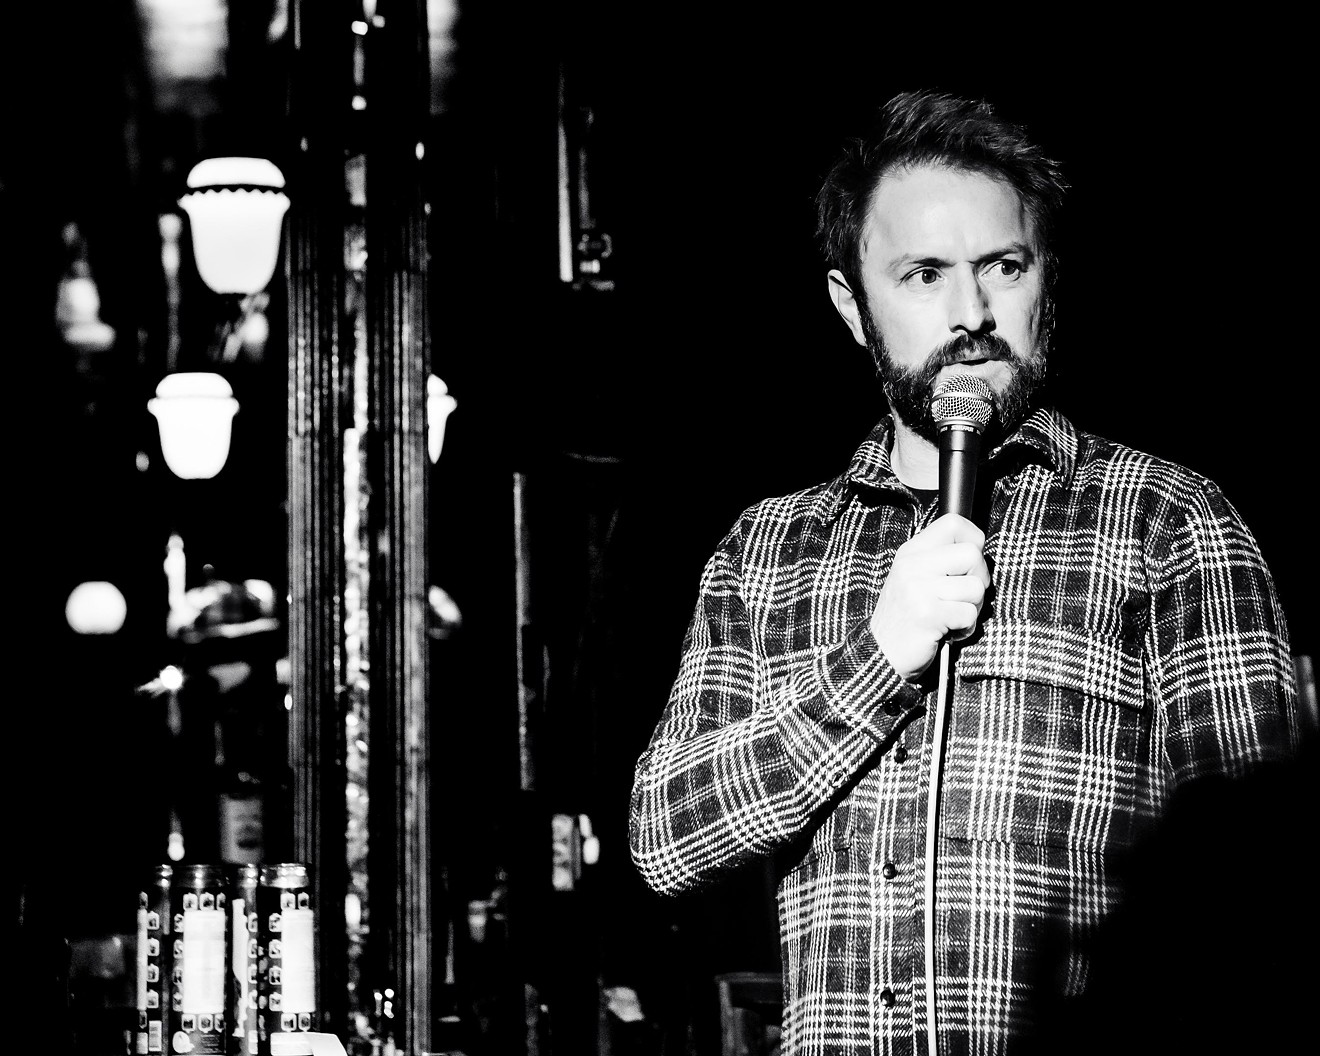 Catch Adam Cayton-Holland's anniversary show at Comedy Works on April 25.